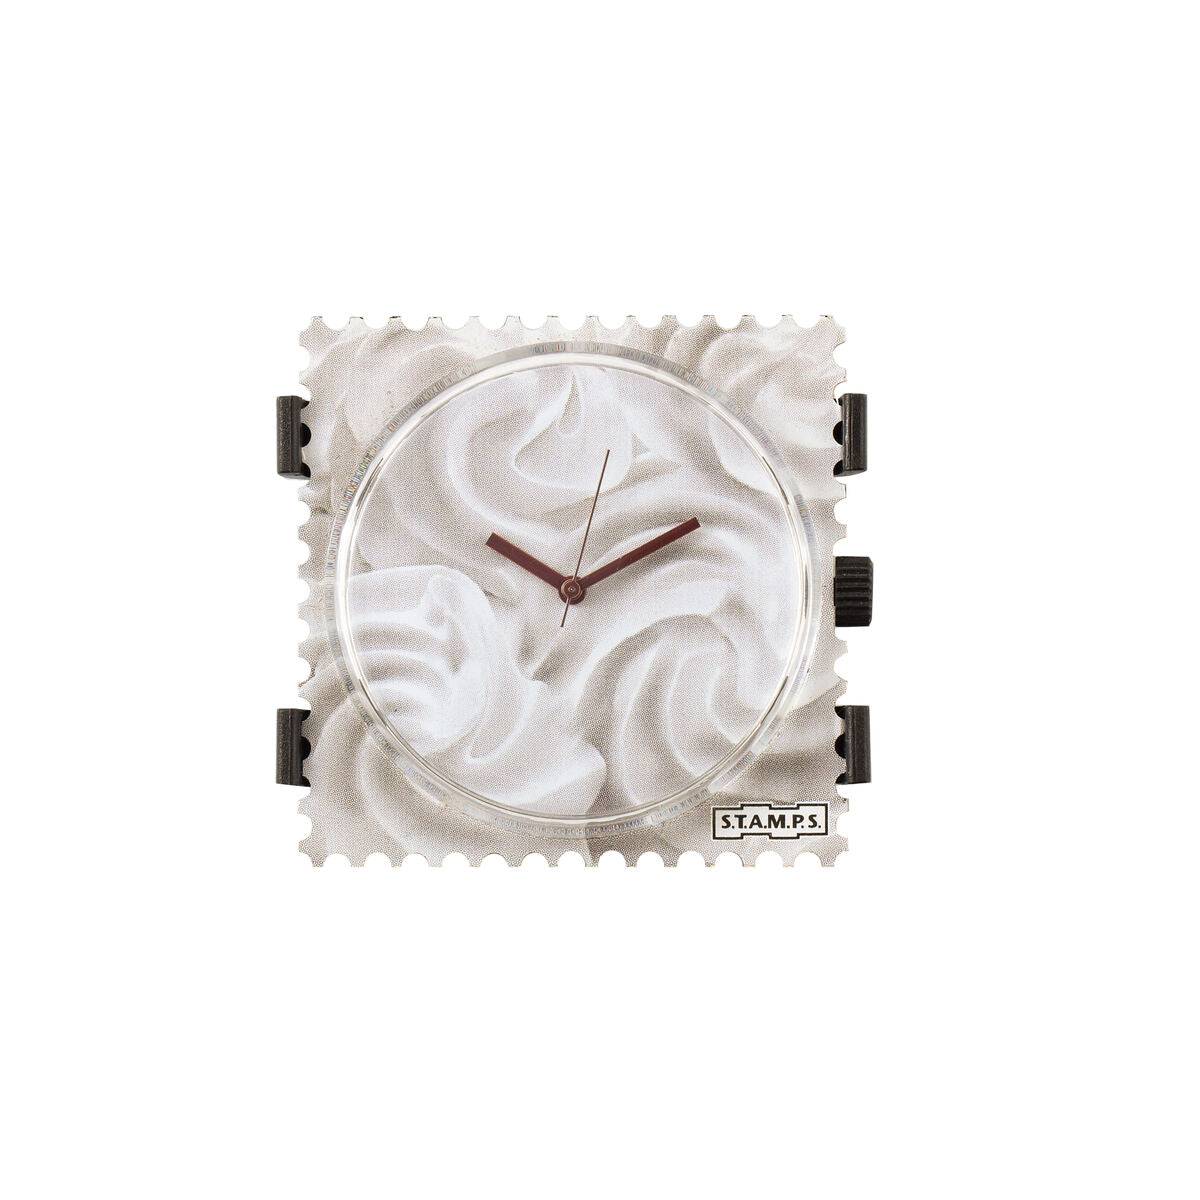 Unisex Watch Stamps STAMPS_GREY_1 (Ø 40 mm)